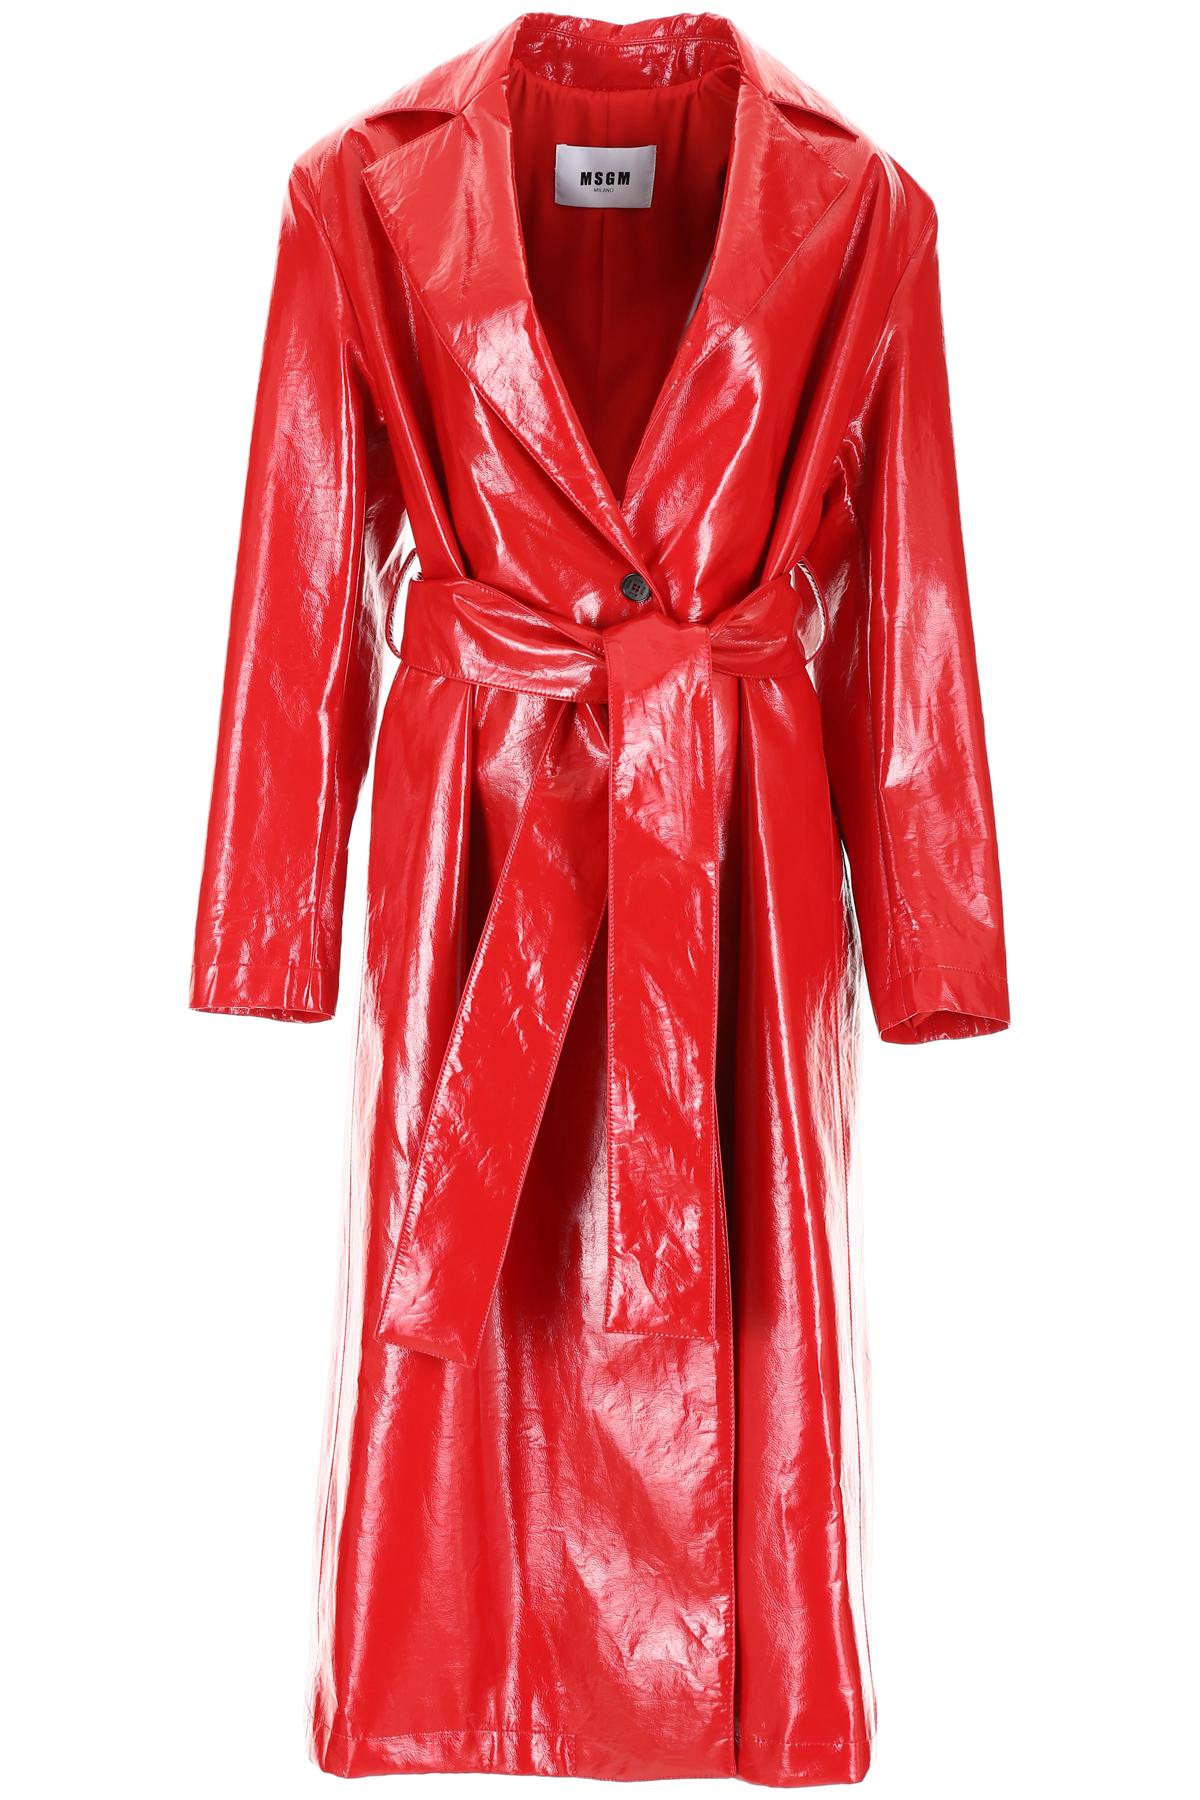 MSGM Vinyl Trench Coat in Red - Lyst